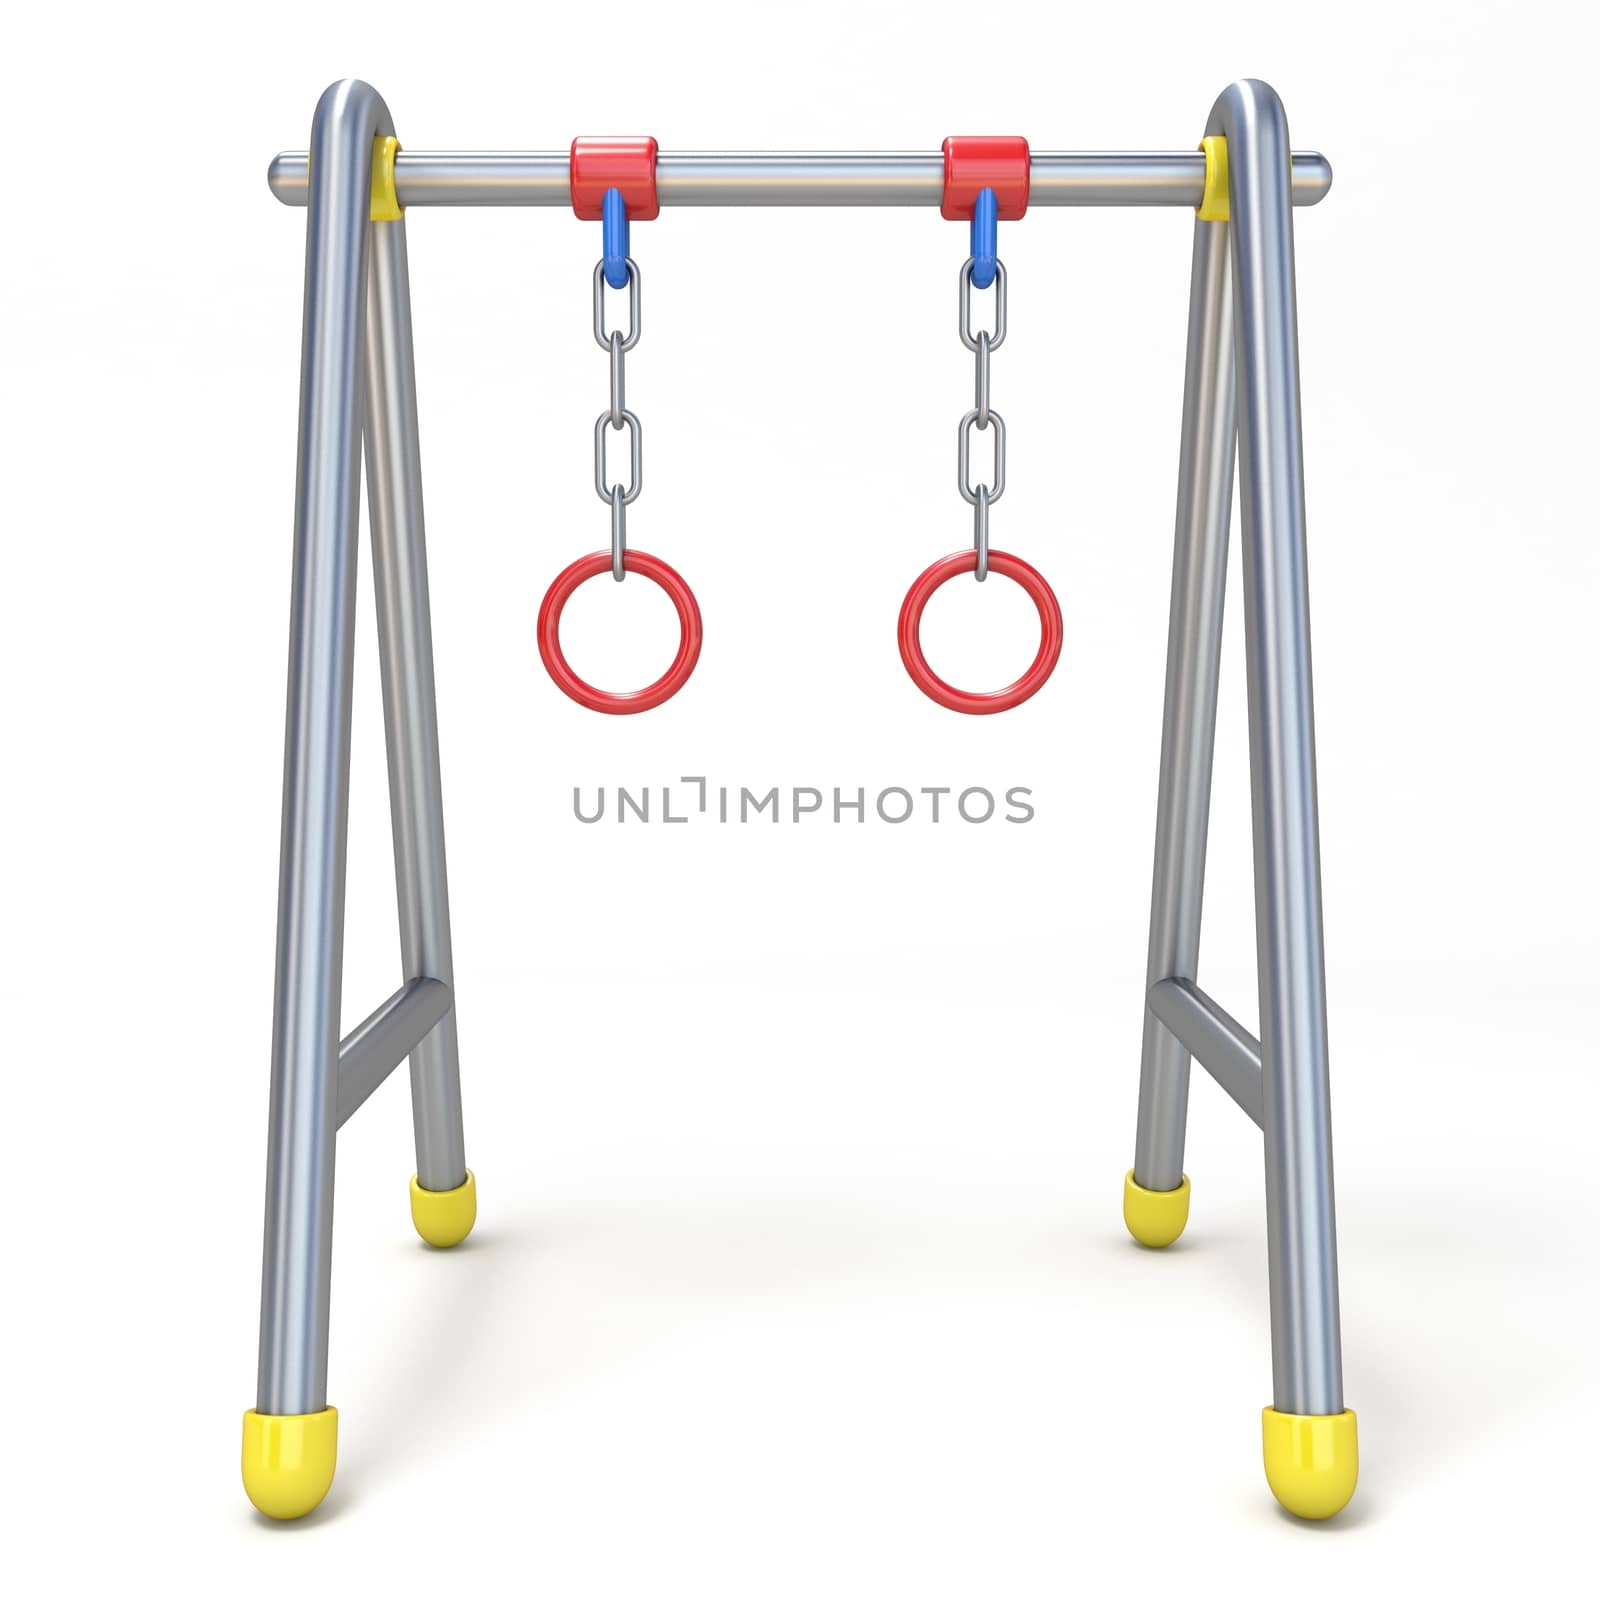 Children swing with metal rings front view 3D render illustration isolated on white background